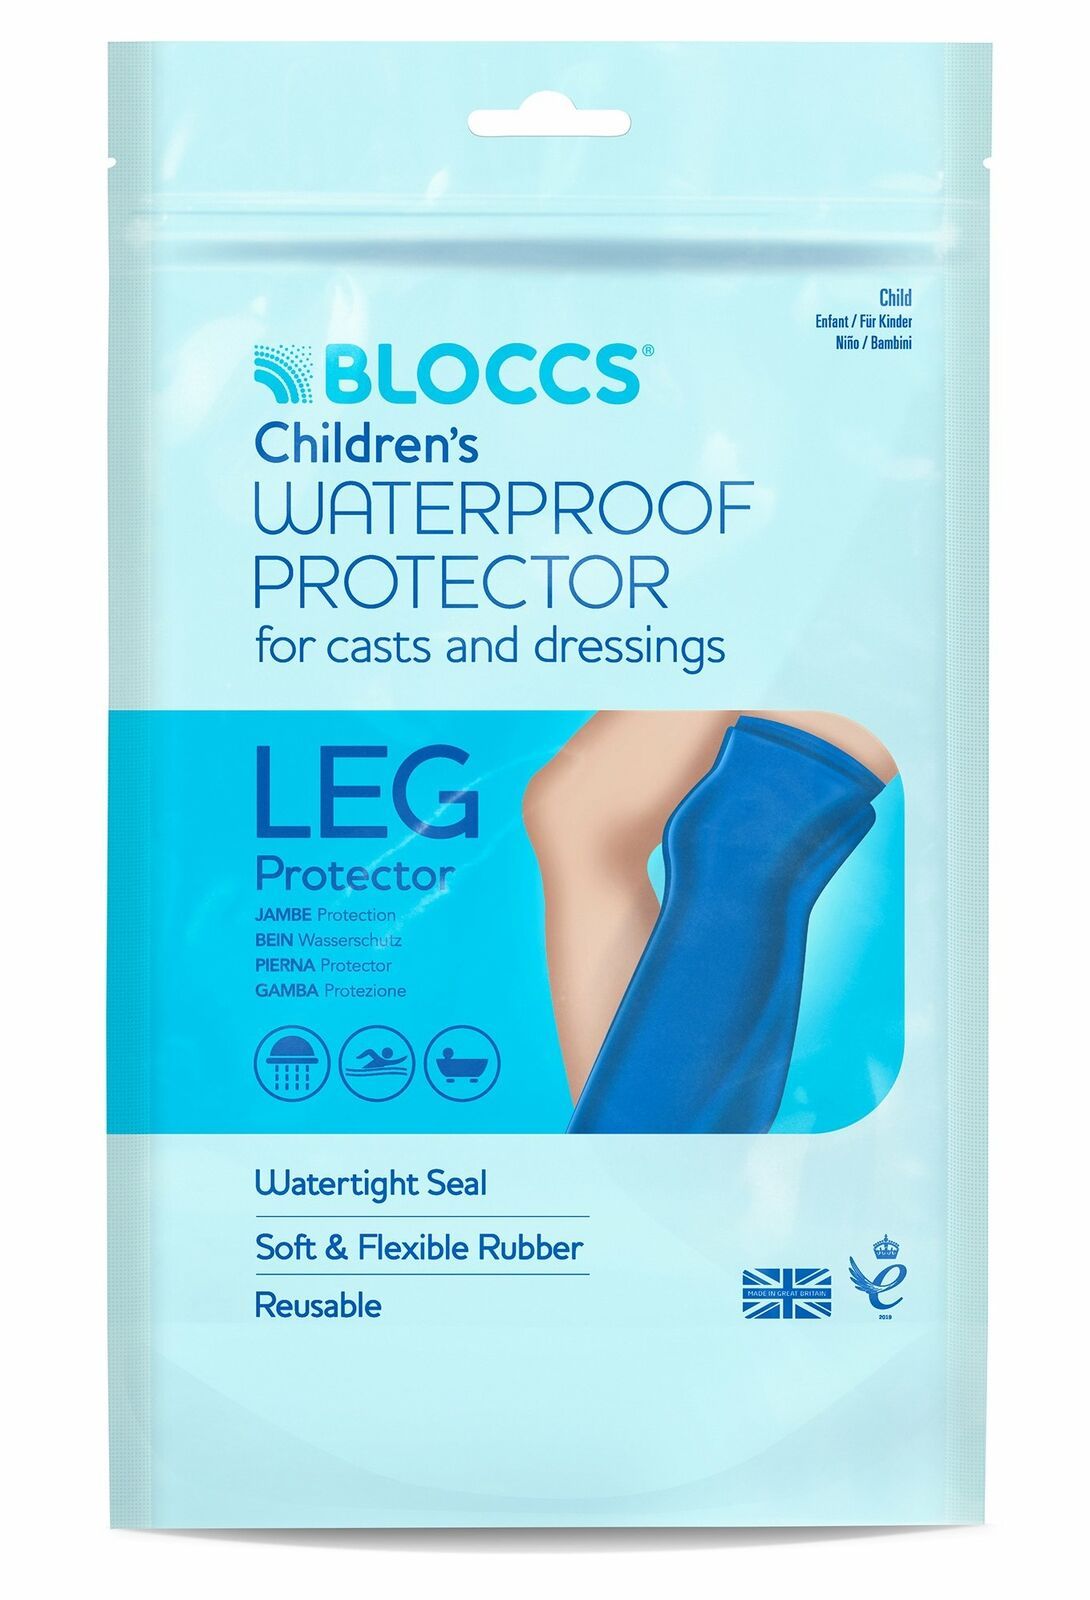 Bloccs Waterproof Protector for Casts and Dressings - Child Full Leg 1-3 yrs